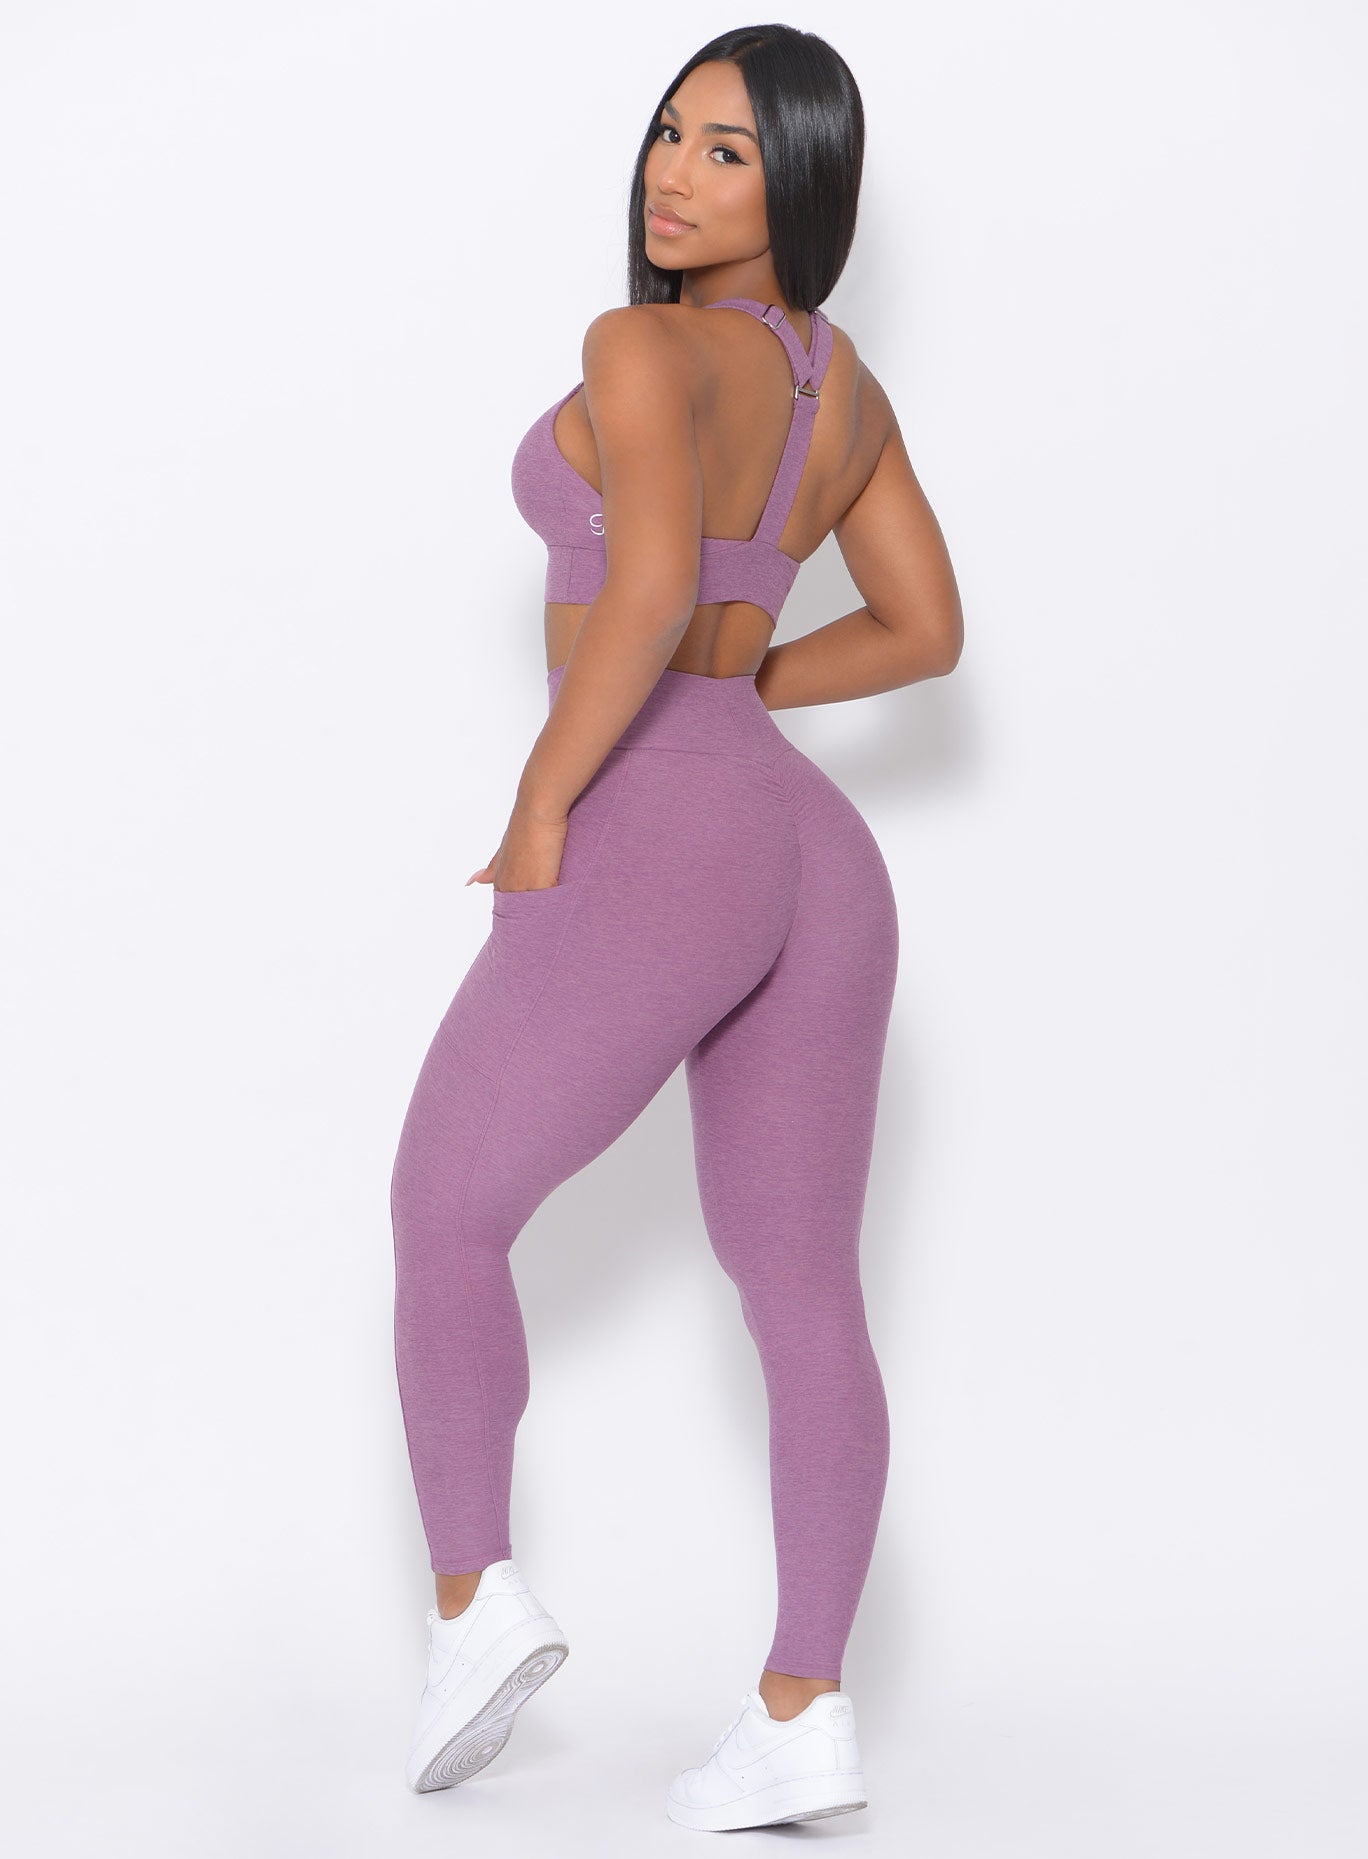 Back view of the model in our lavender curves high waist leggings